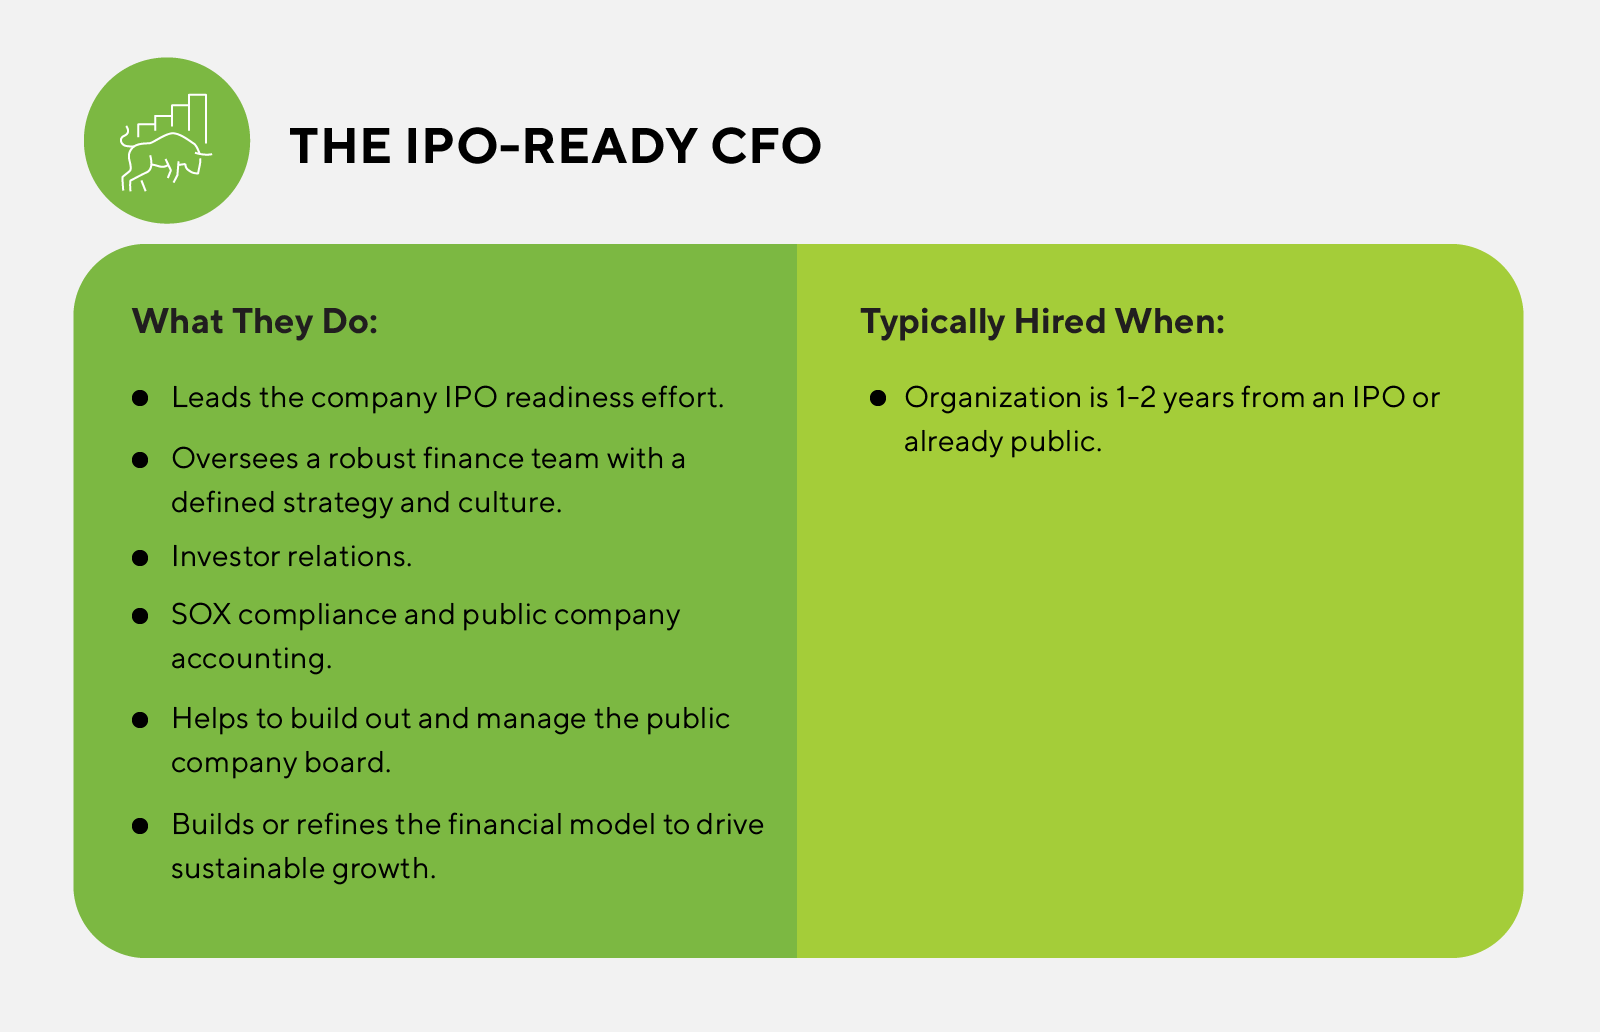 The IPO-Ready Leader Chart